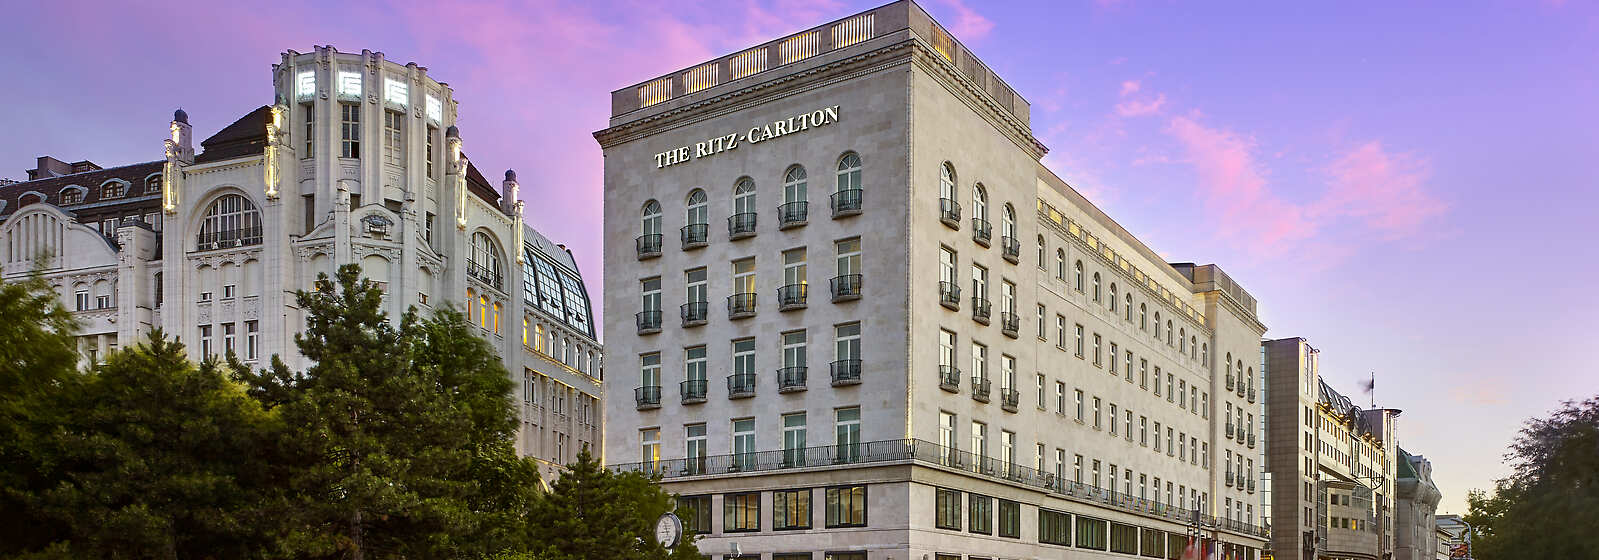 Take a walk at World Heritage sites that lay right at your feet when staying at The Ritz-Carlton